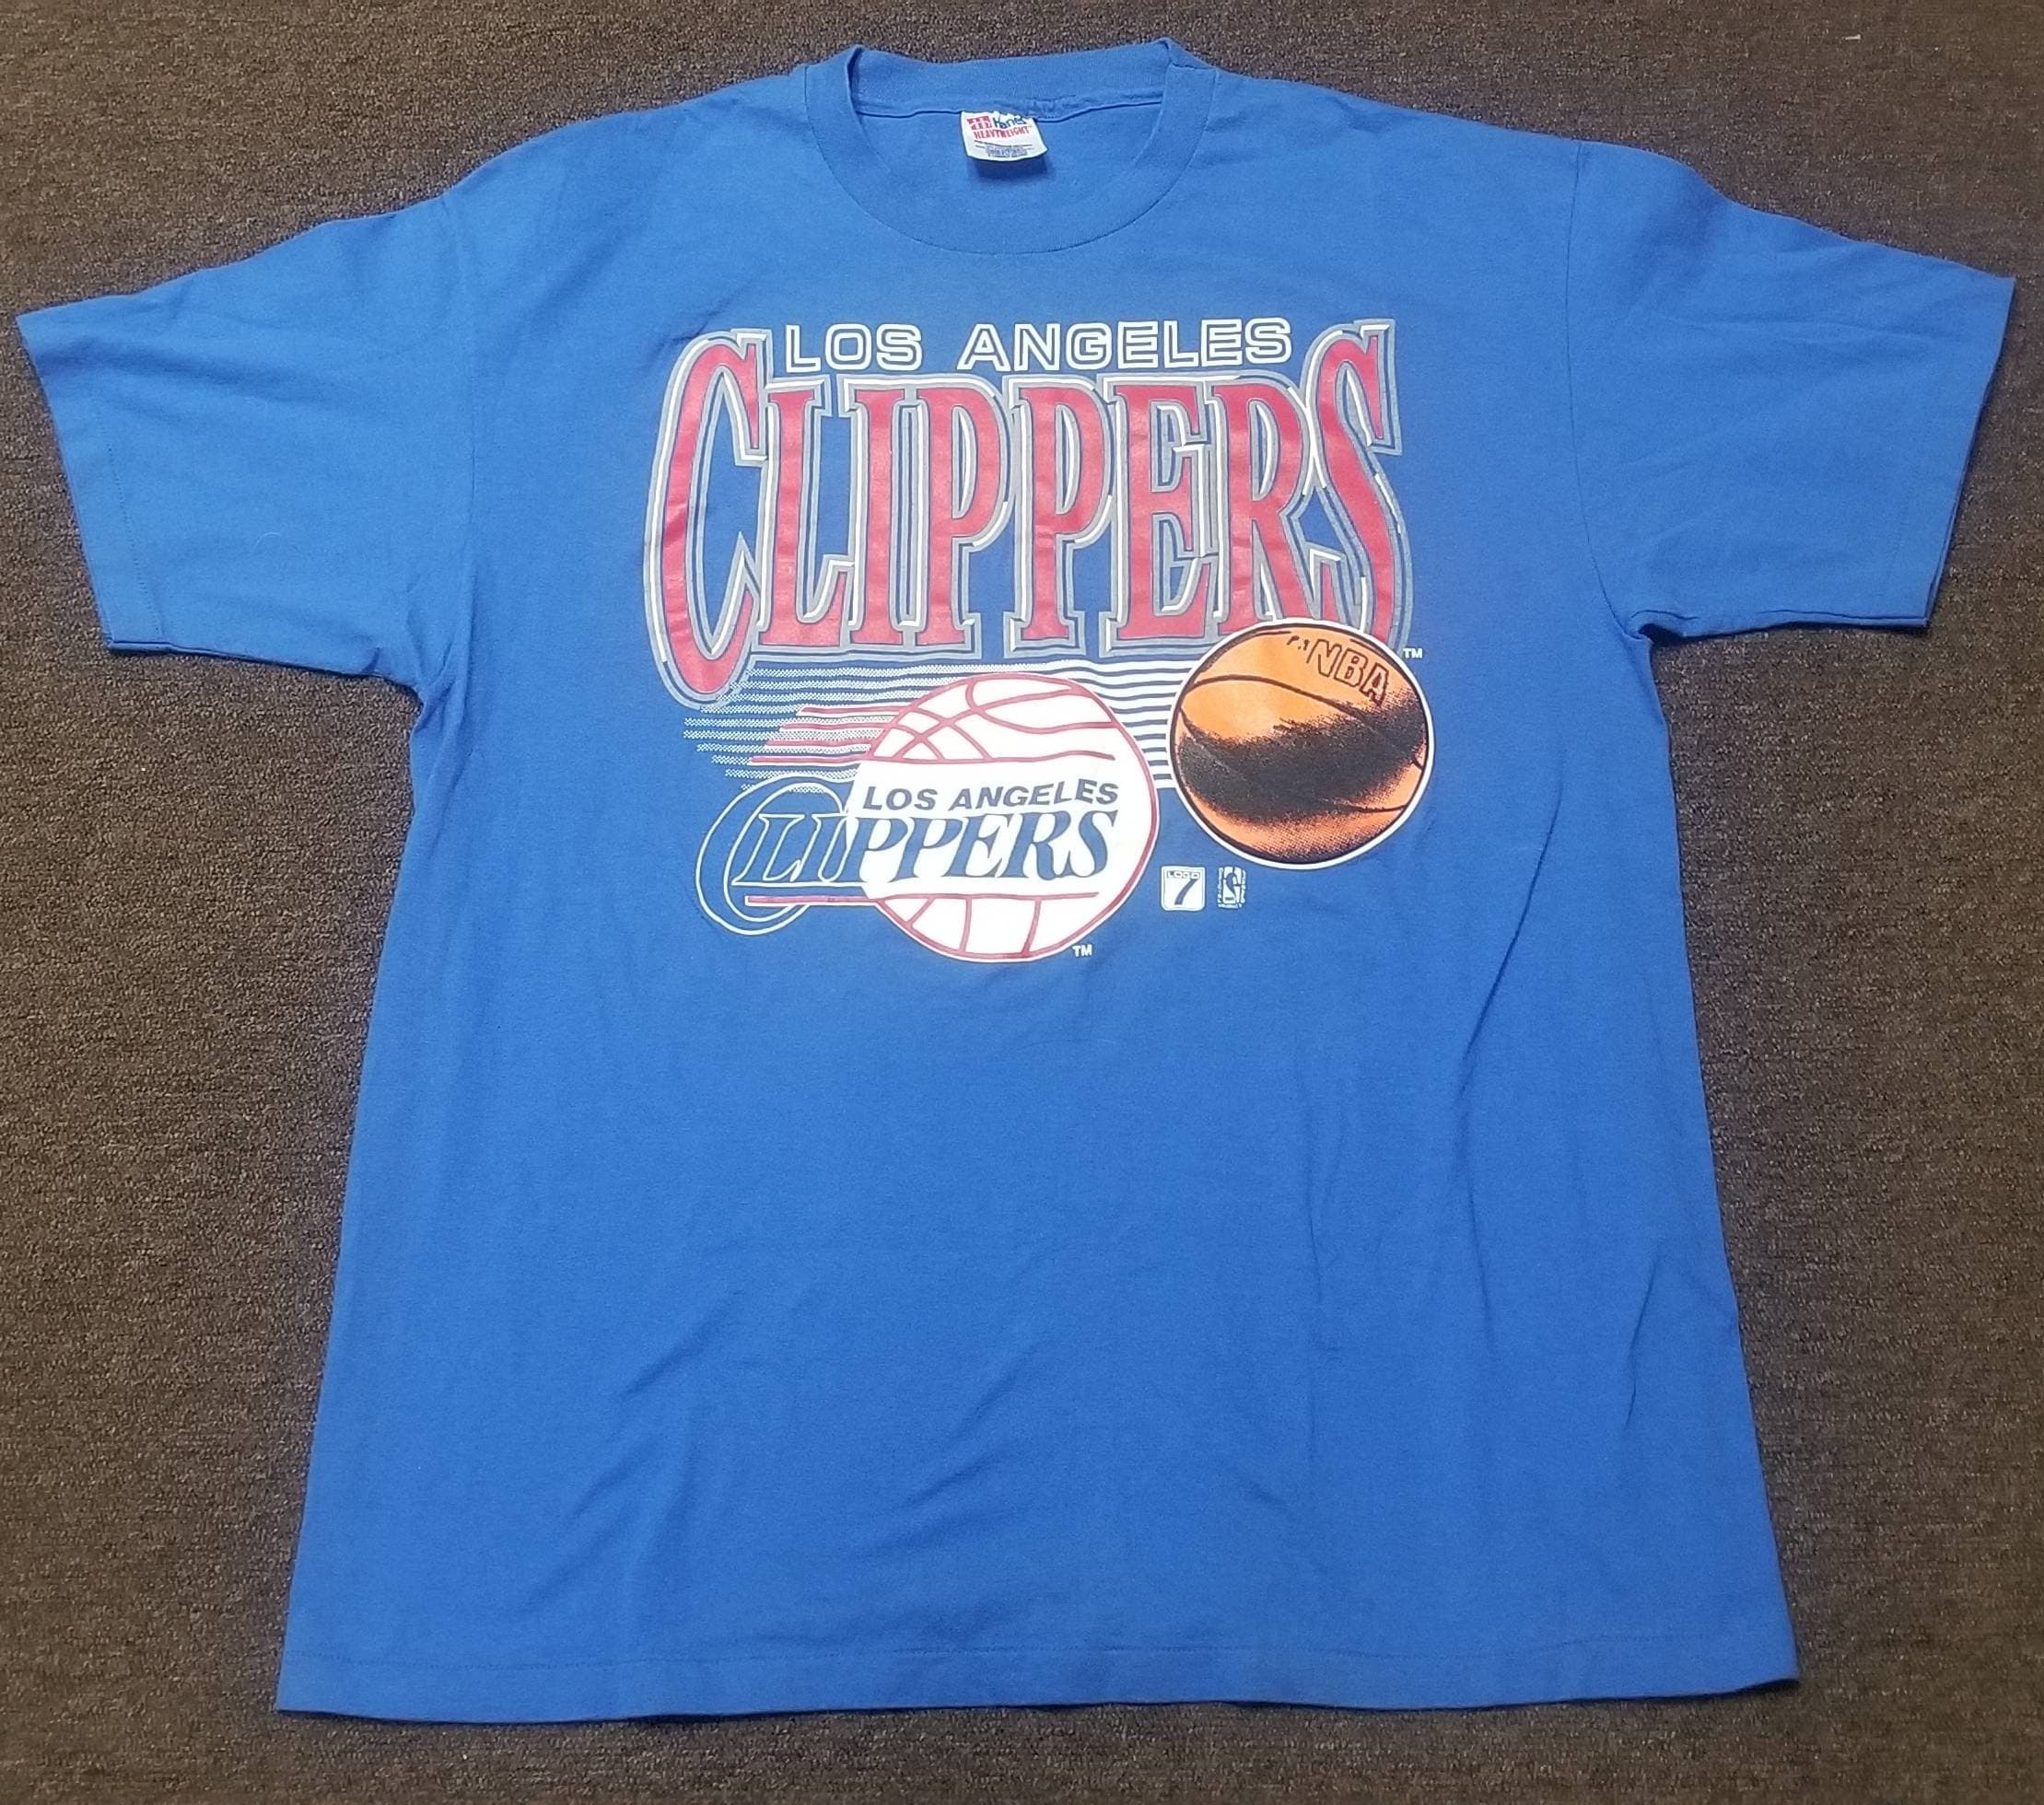 Xl 90s LA Clippers Shirtlos Angeles Clippers Shirt90s 